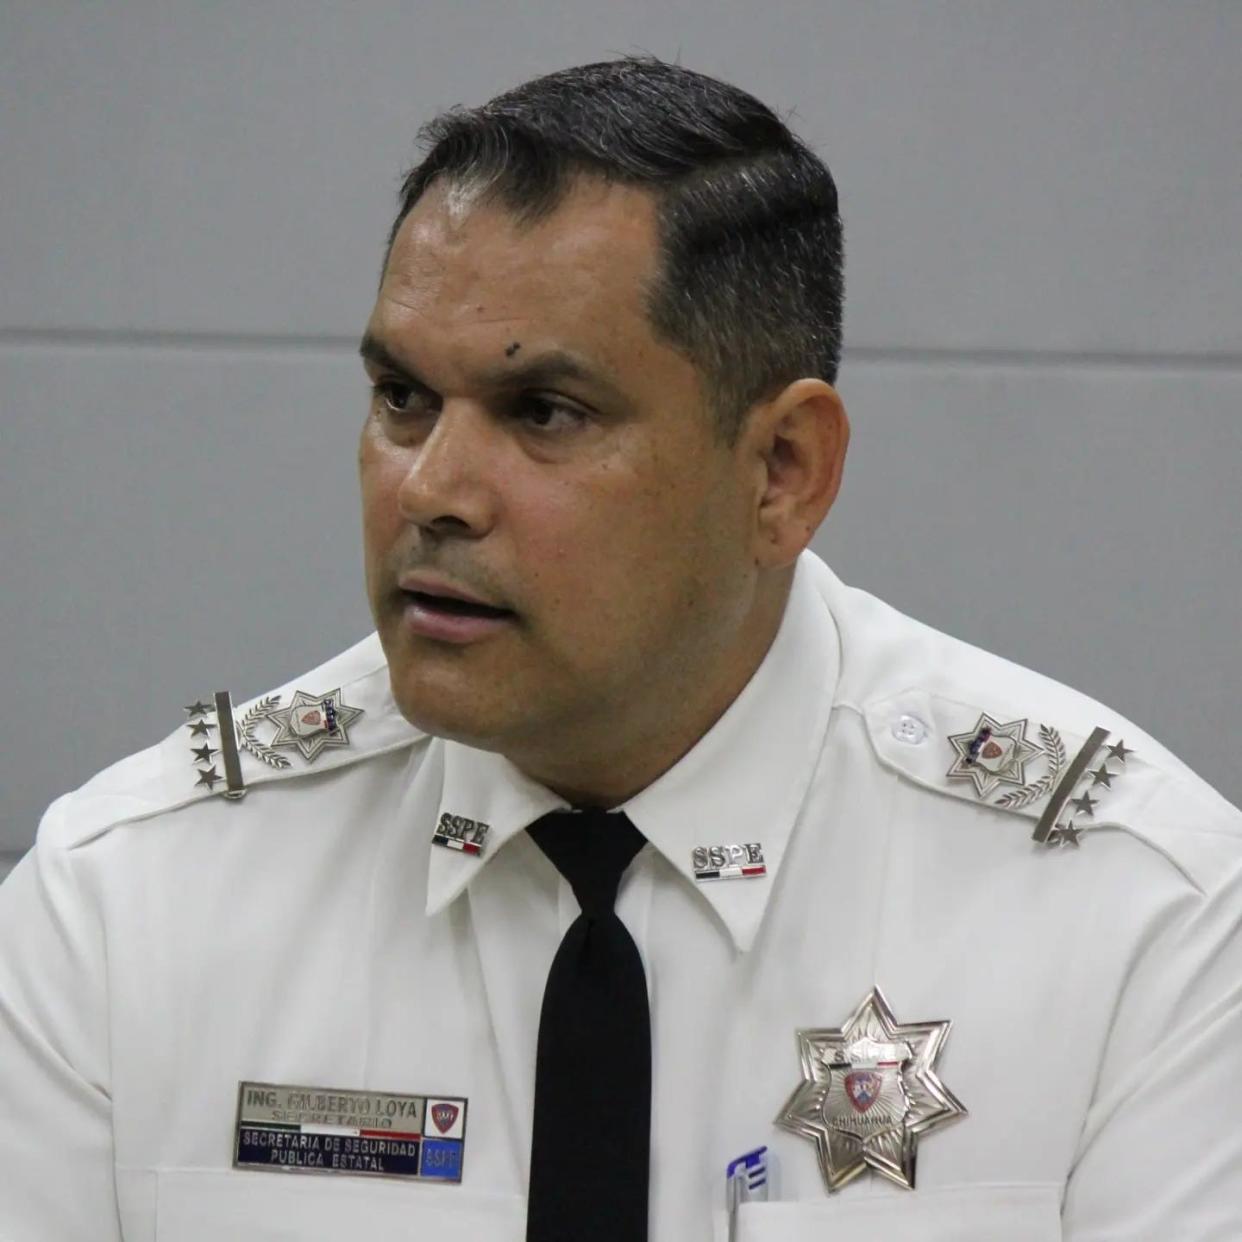 Gilberto Loya is the state public safety secretary for the state of Chihuahua, Mexico.